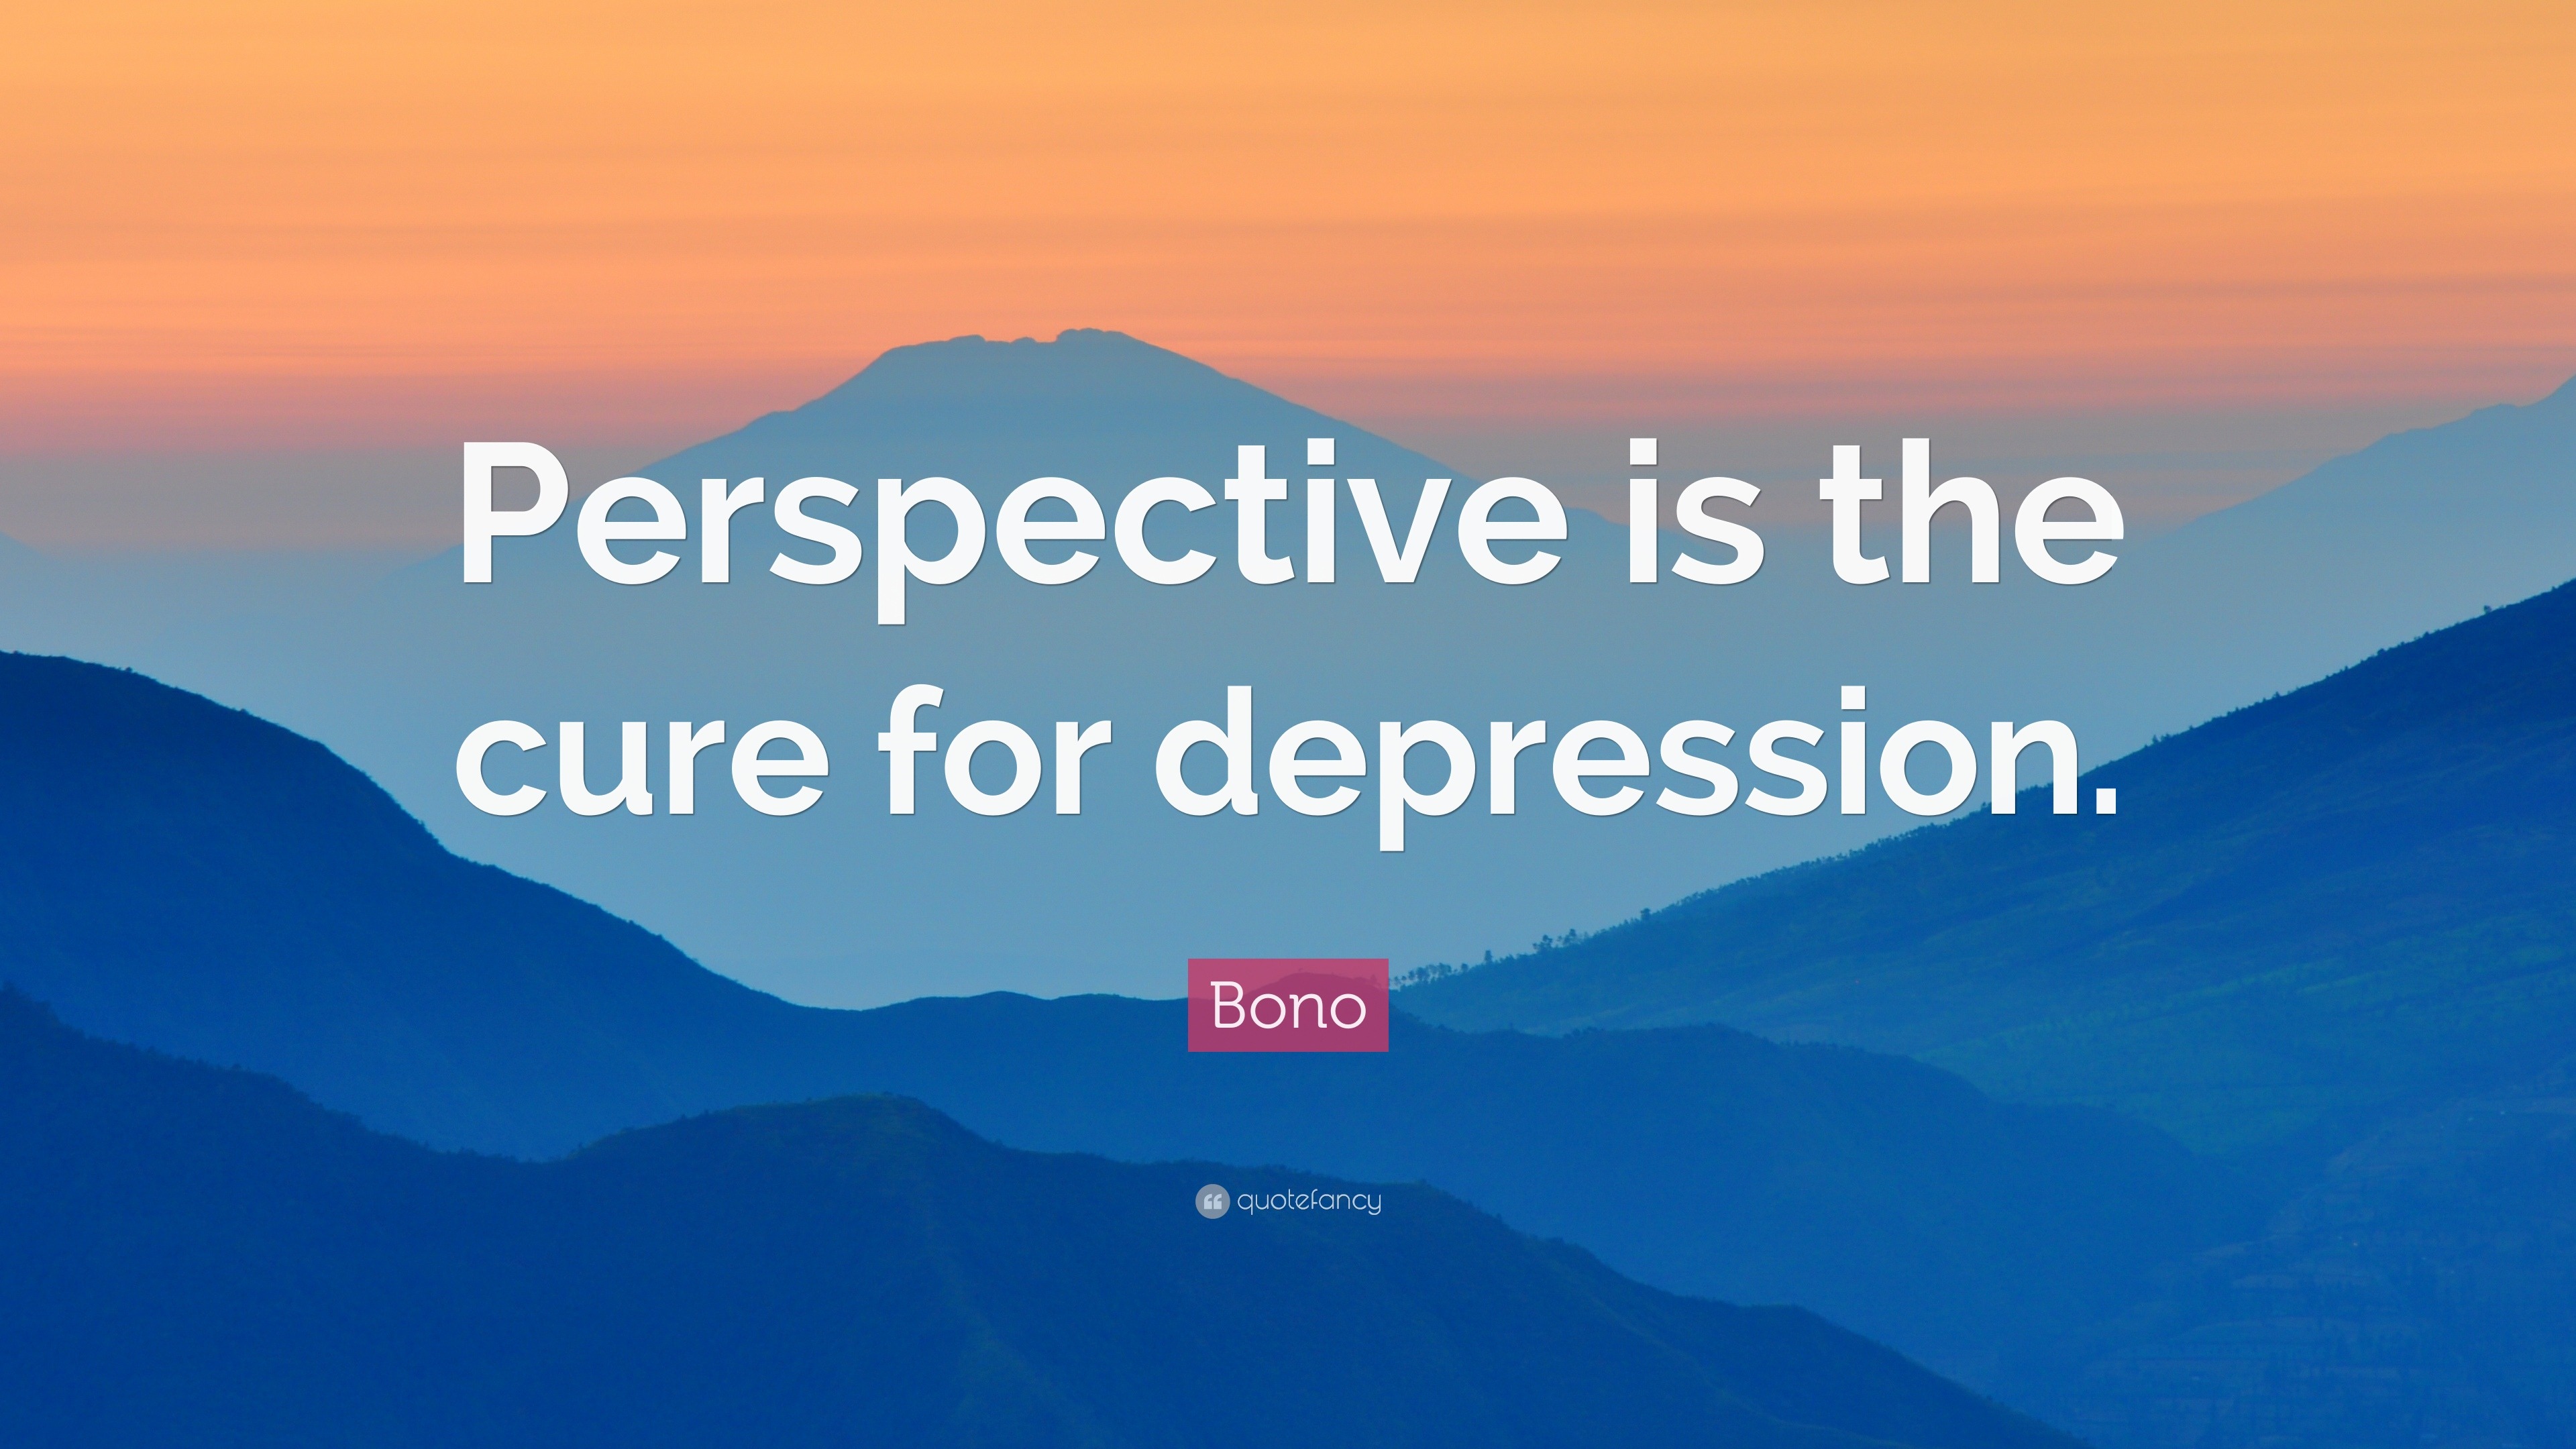 Bono Quote: “Perspective is the cure for depression.”